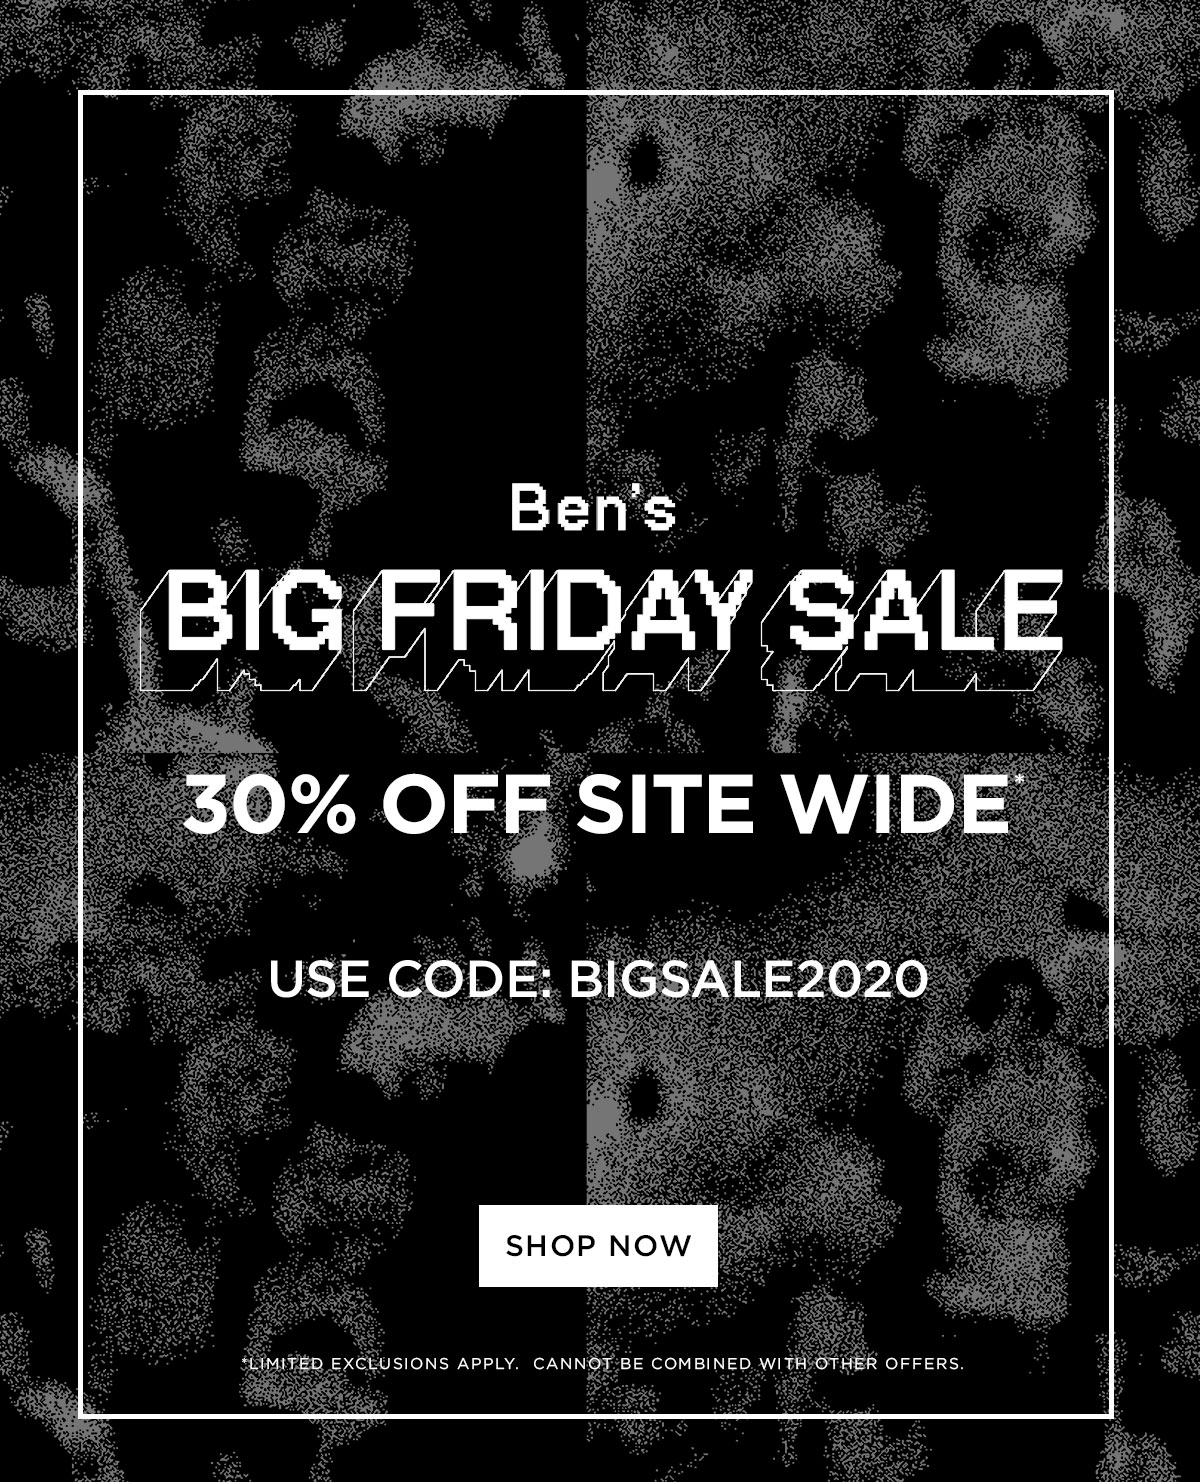 Ben''s Big Friday Sale | 30% Off Site Wide | Use Code BIGSALE2020 | Shop Now | Limited exclusions apply. Cannot be combined with other offers.